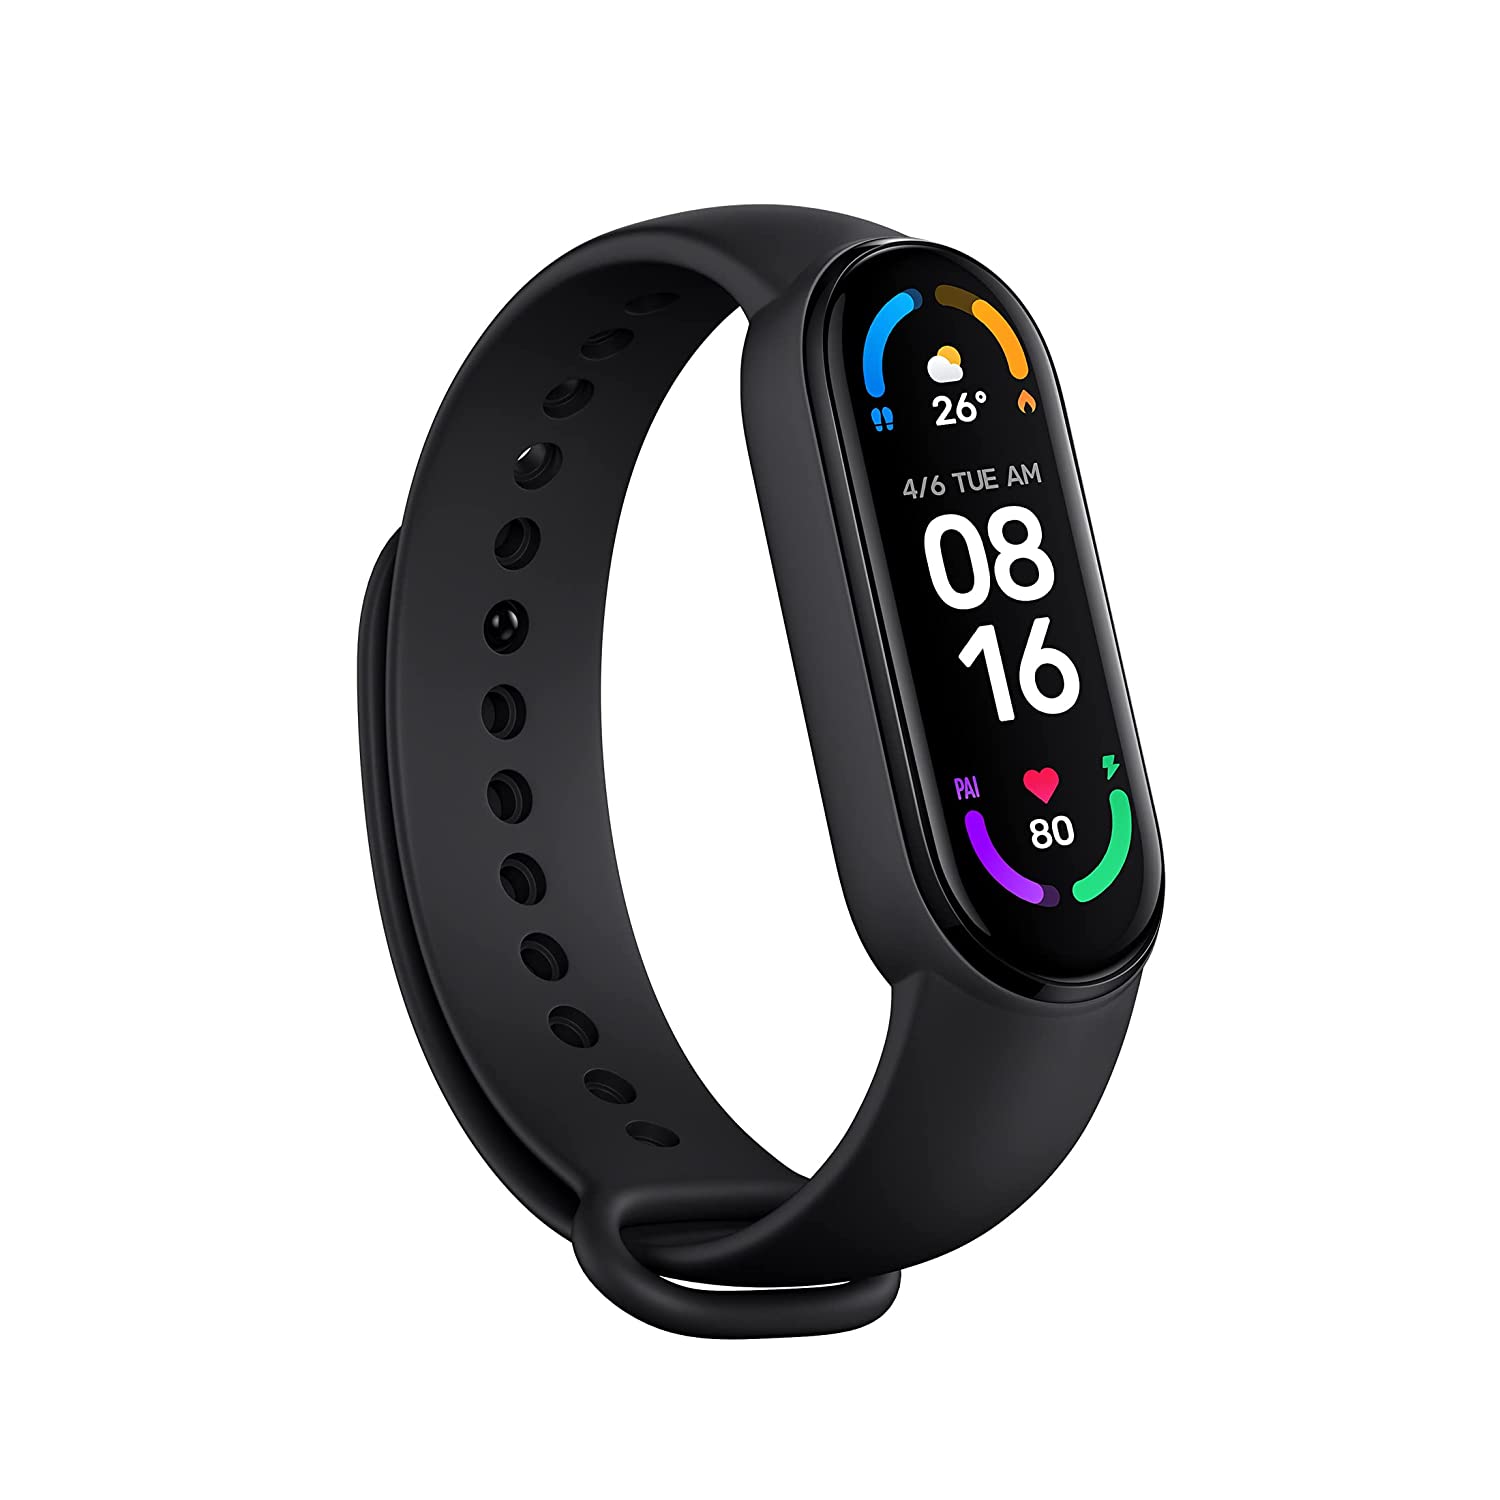 Mi Smart Band 6 is the best-selling fitness band in India